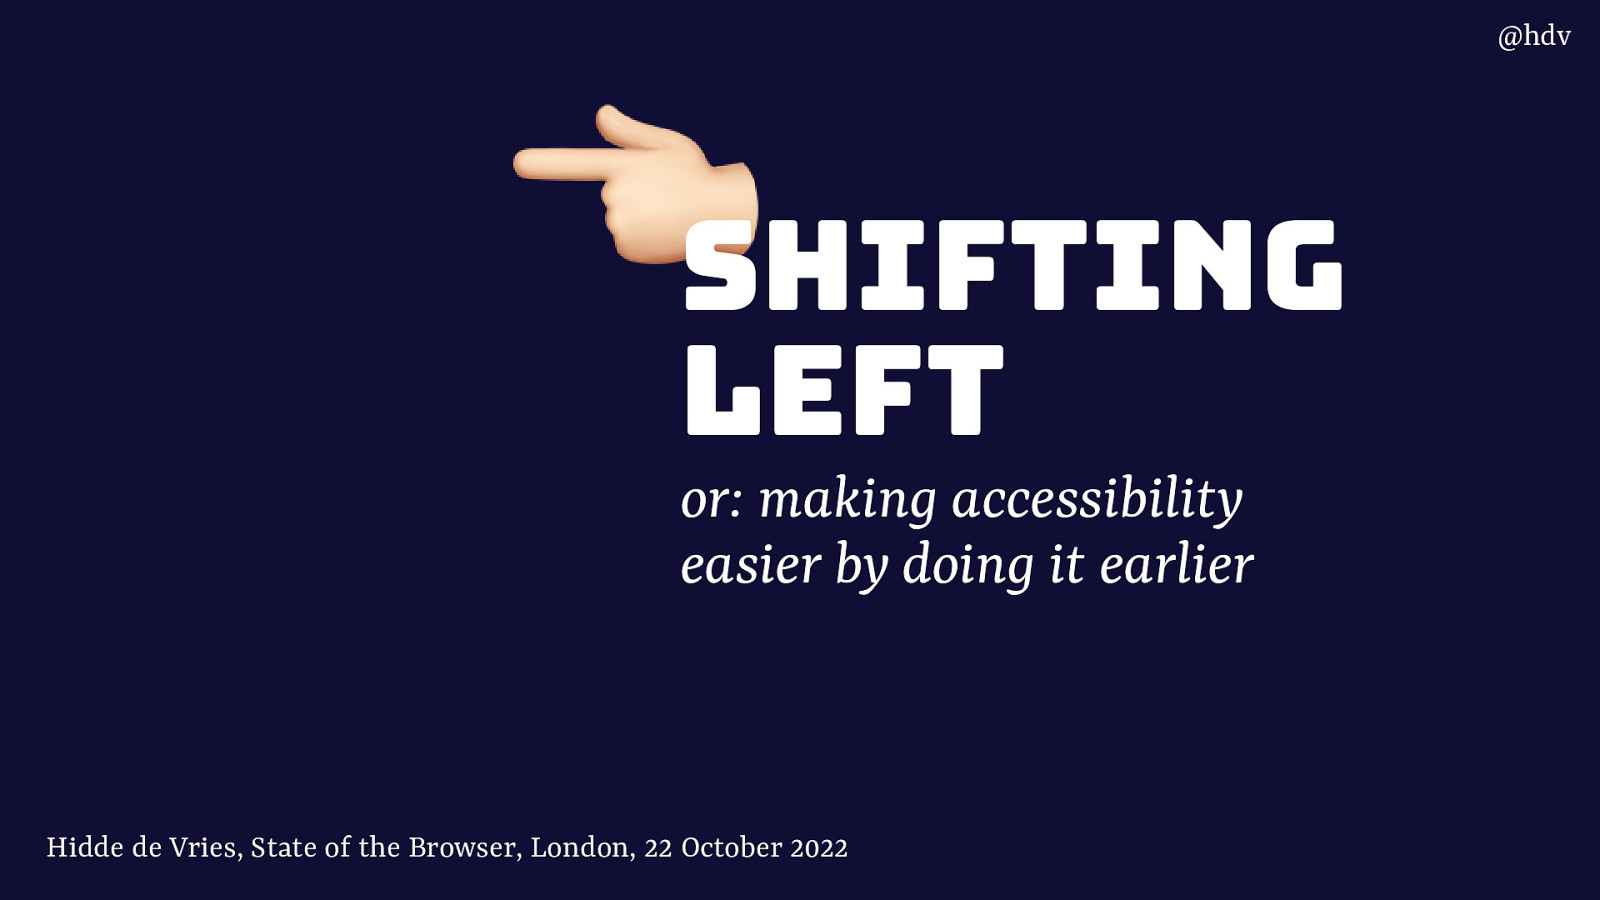 Shifting left, or: making accessibility easier by doing it earlier